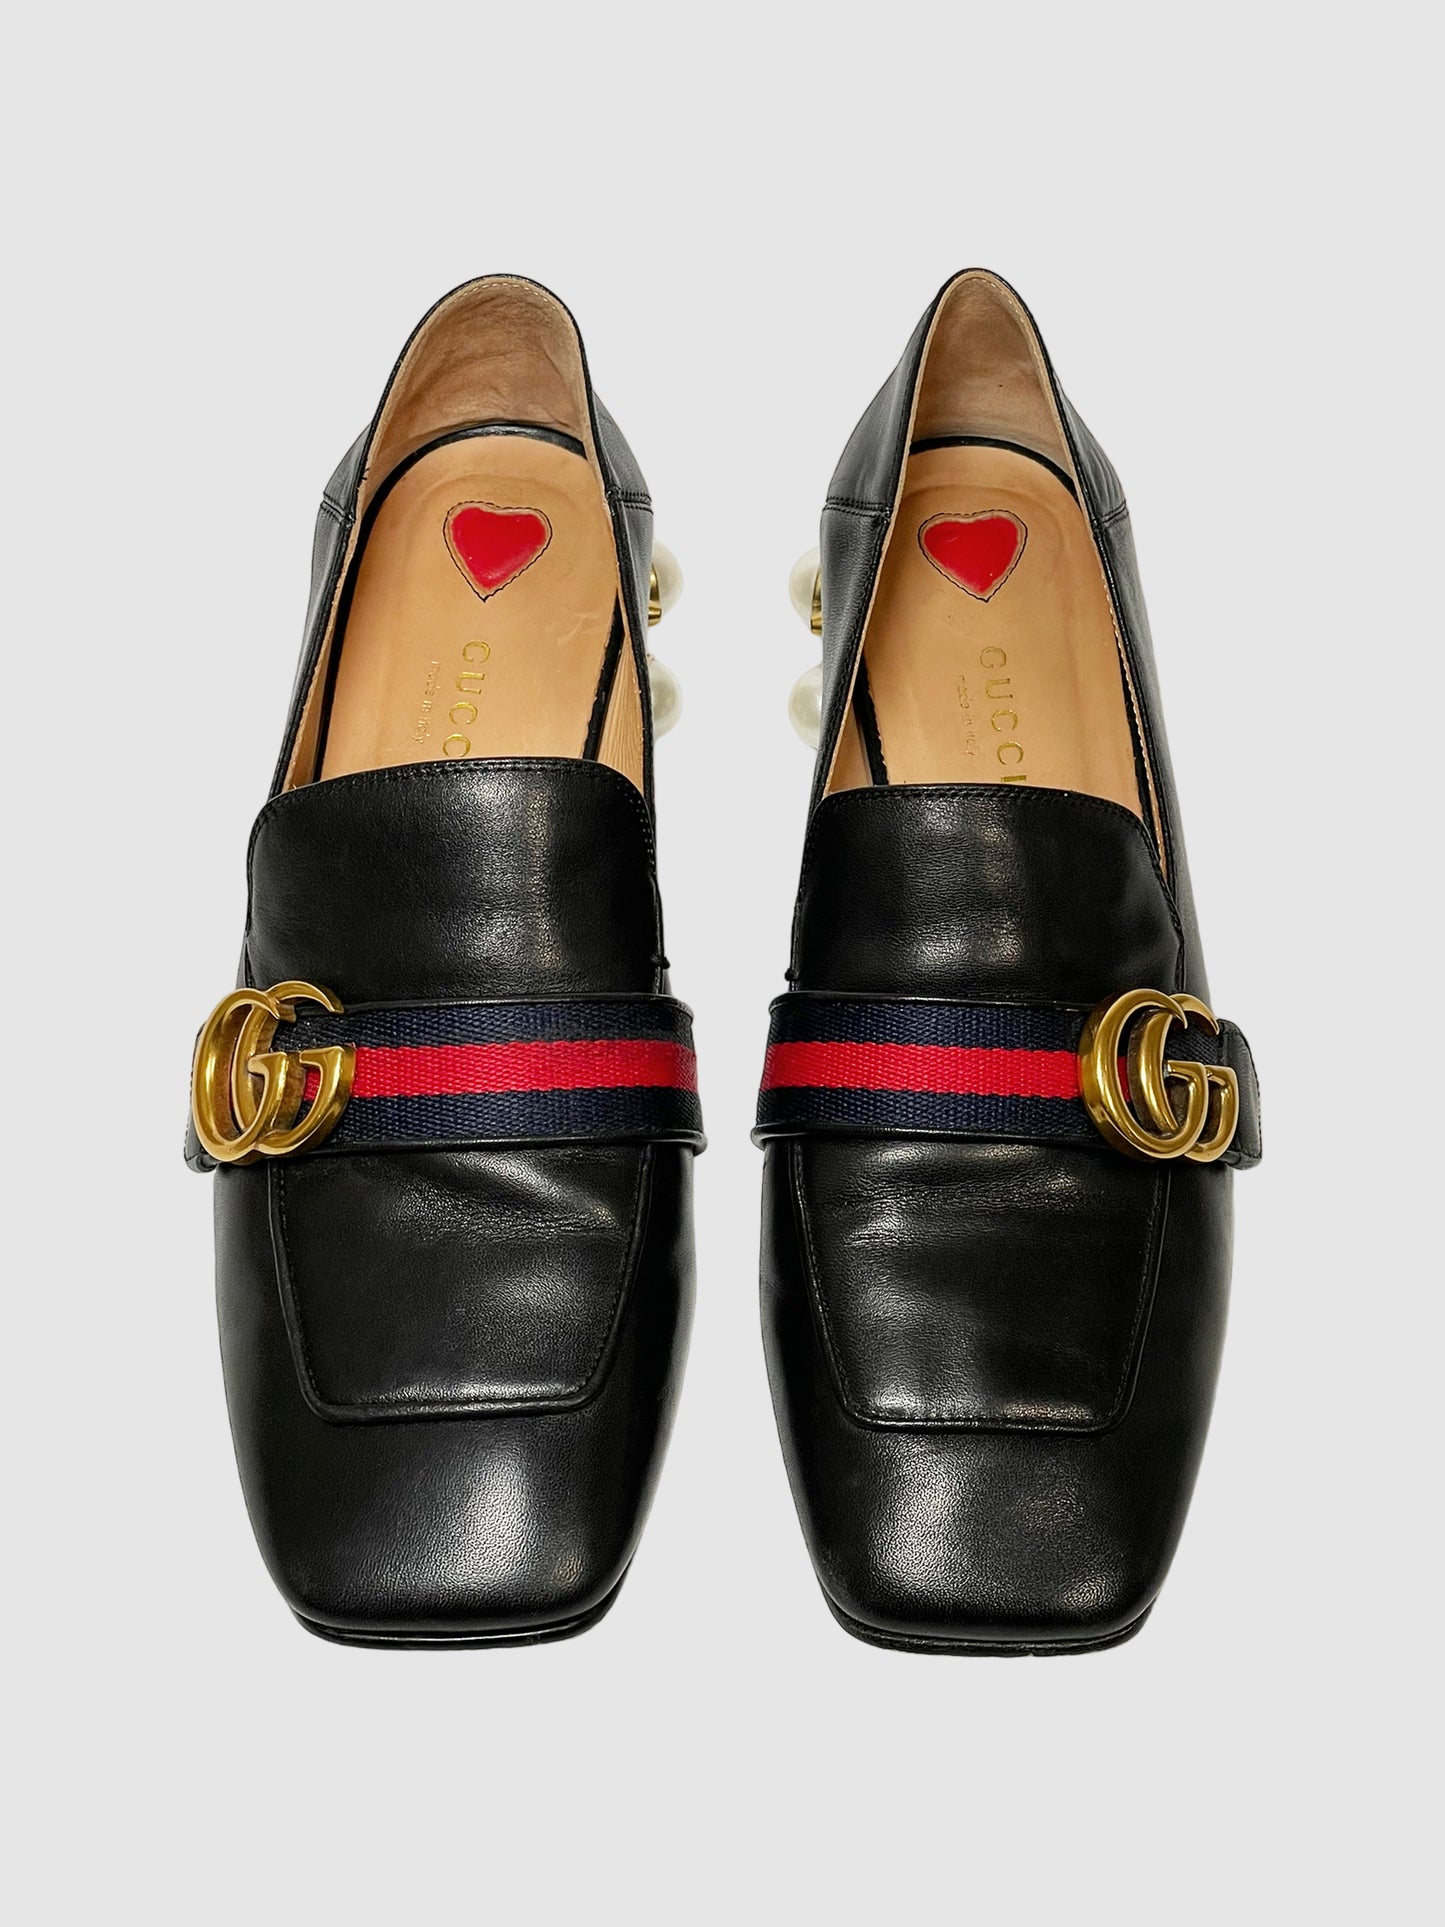 Gucci Faux Pearl Accents Leather Loafers - Size 39